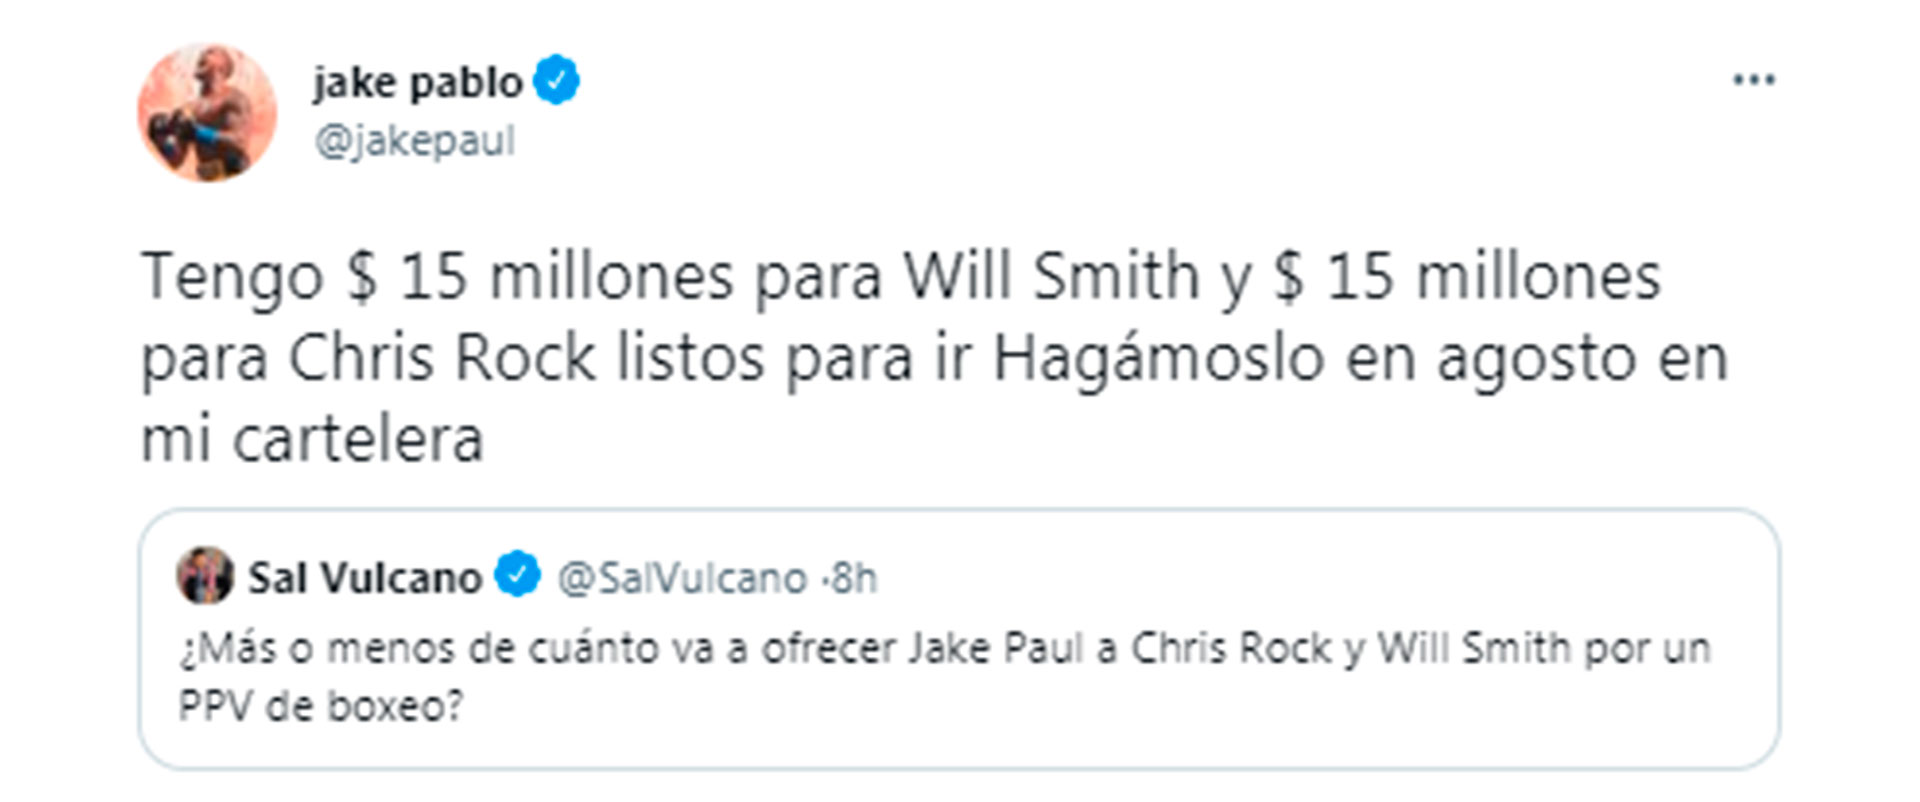 Jake Paul offered to meet Will Smith and Chris Rock in an episode in August